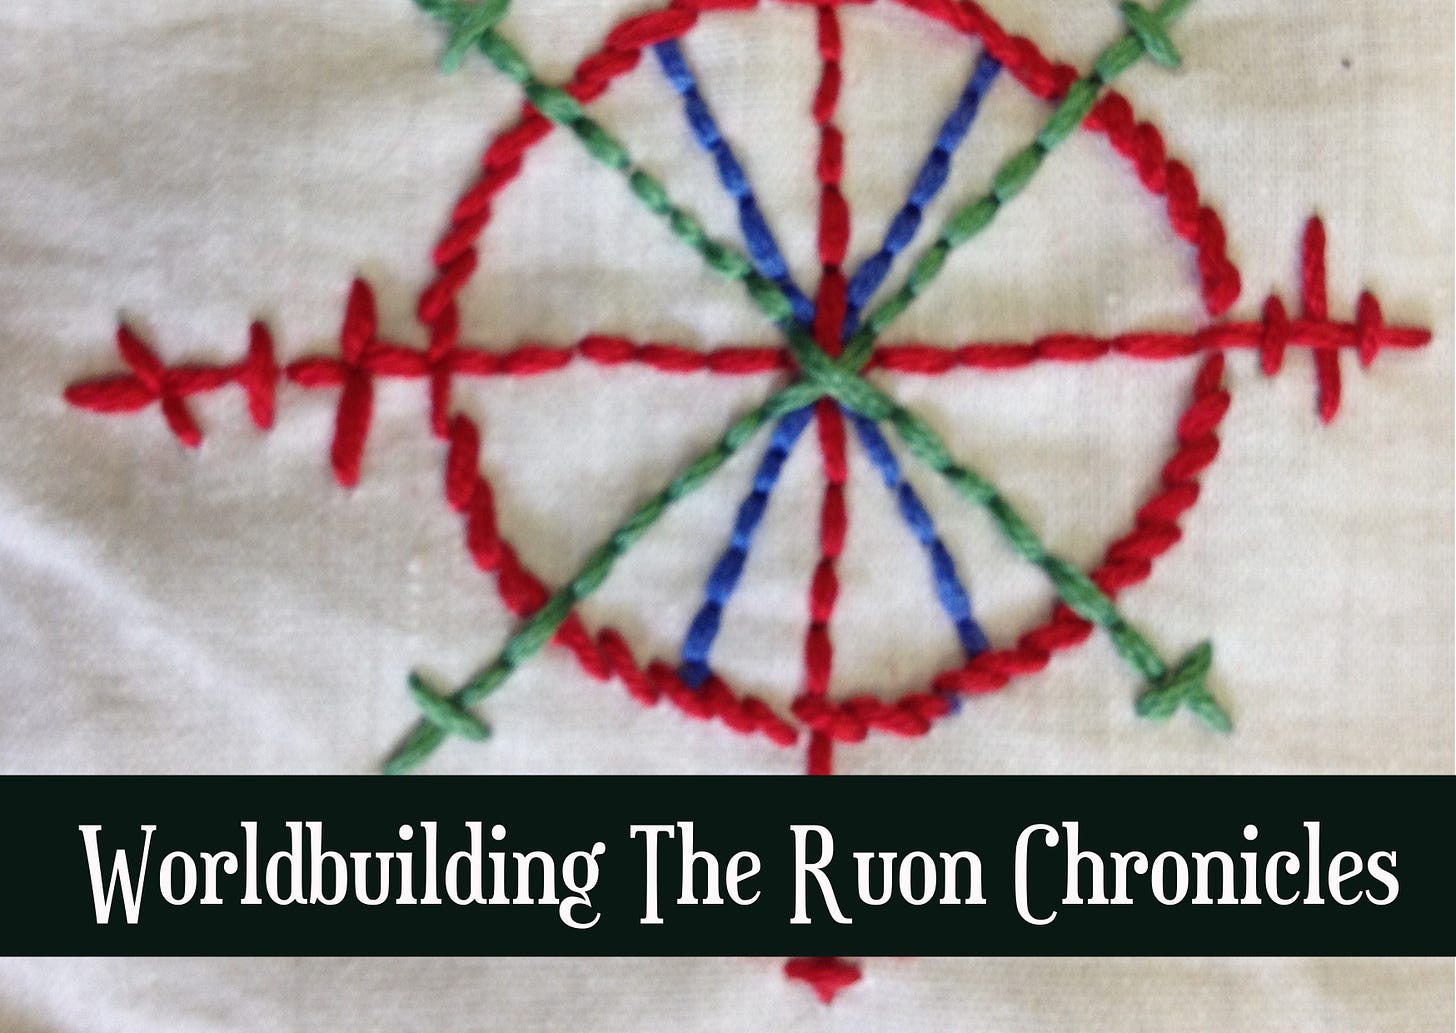 Header image showing embroidered Ruon charm